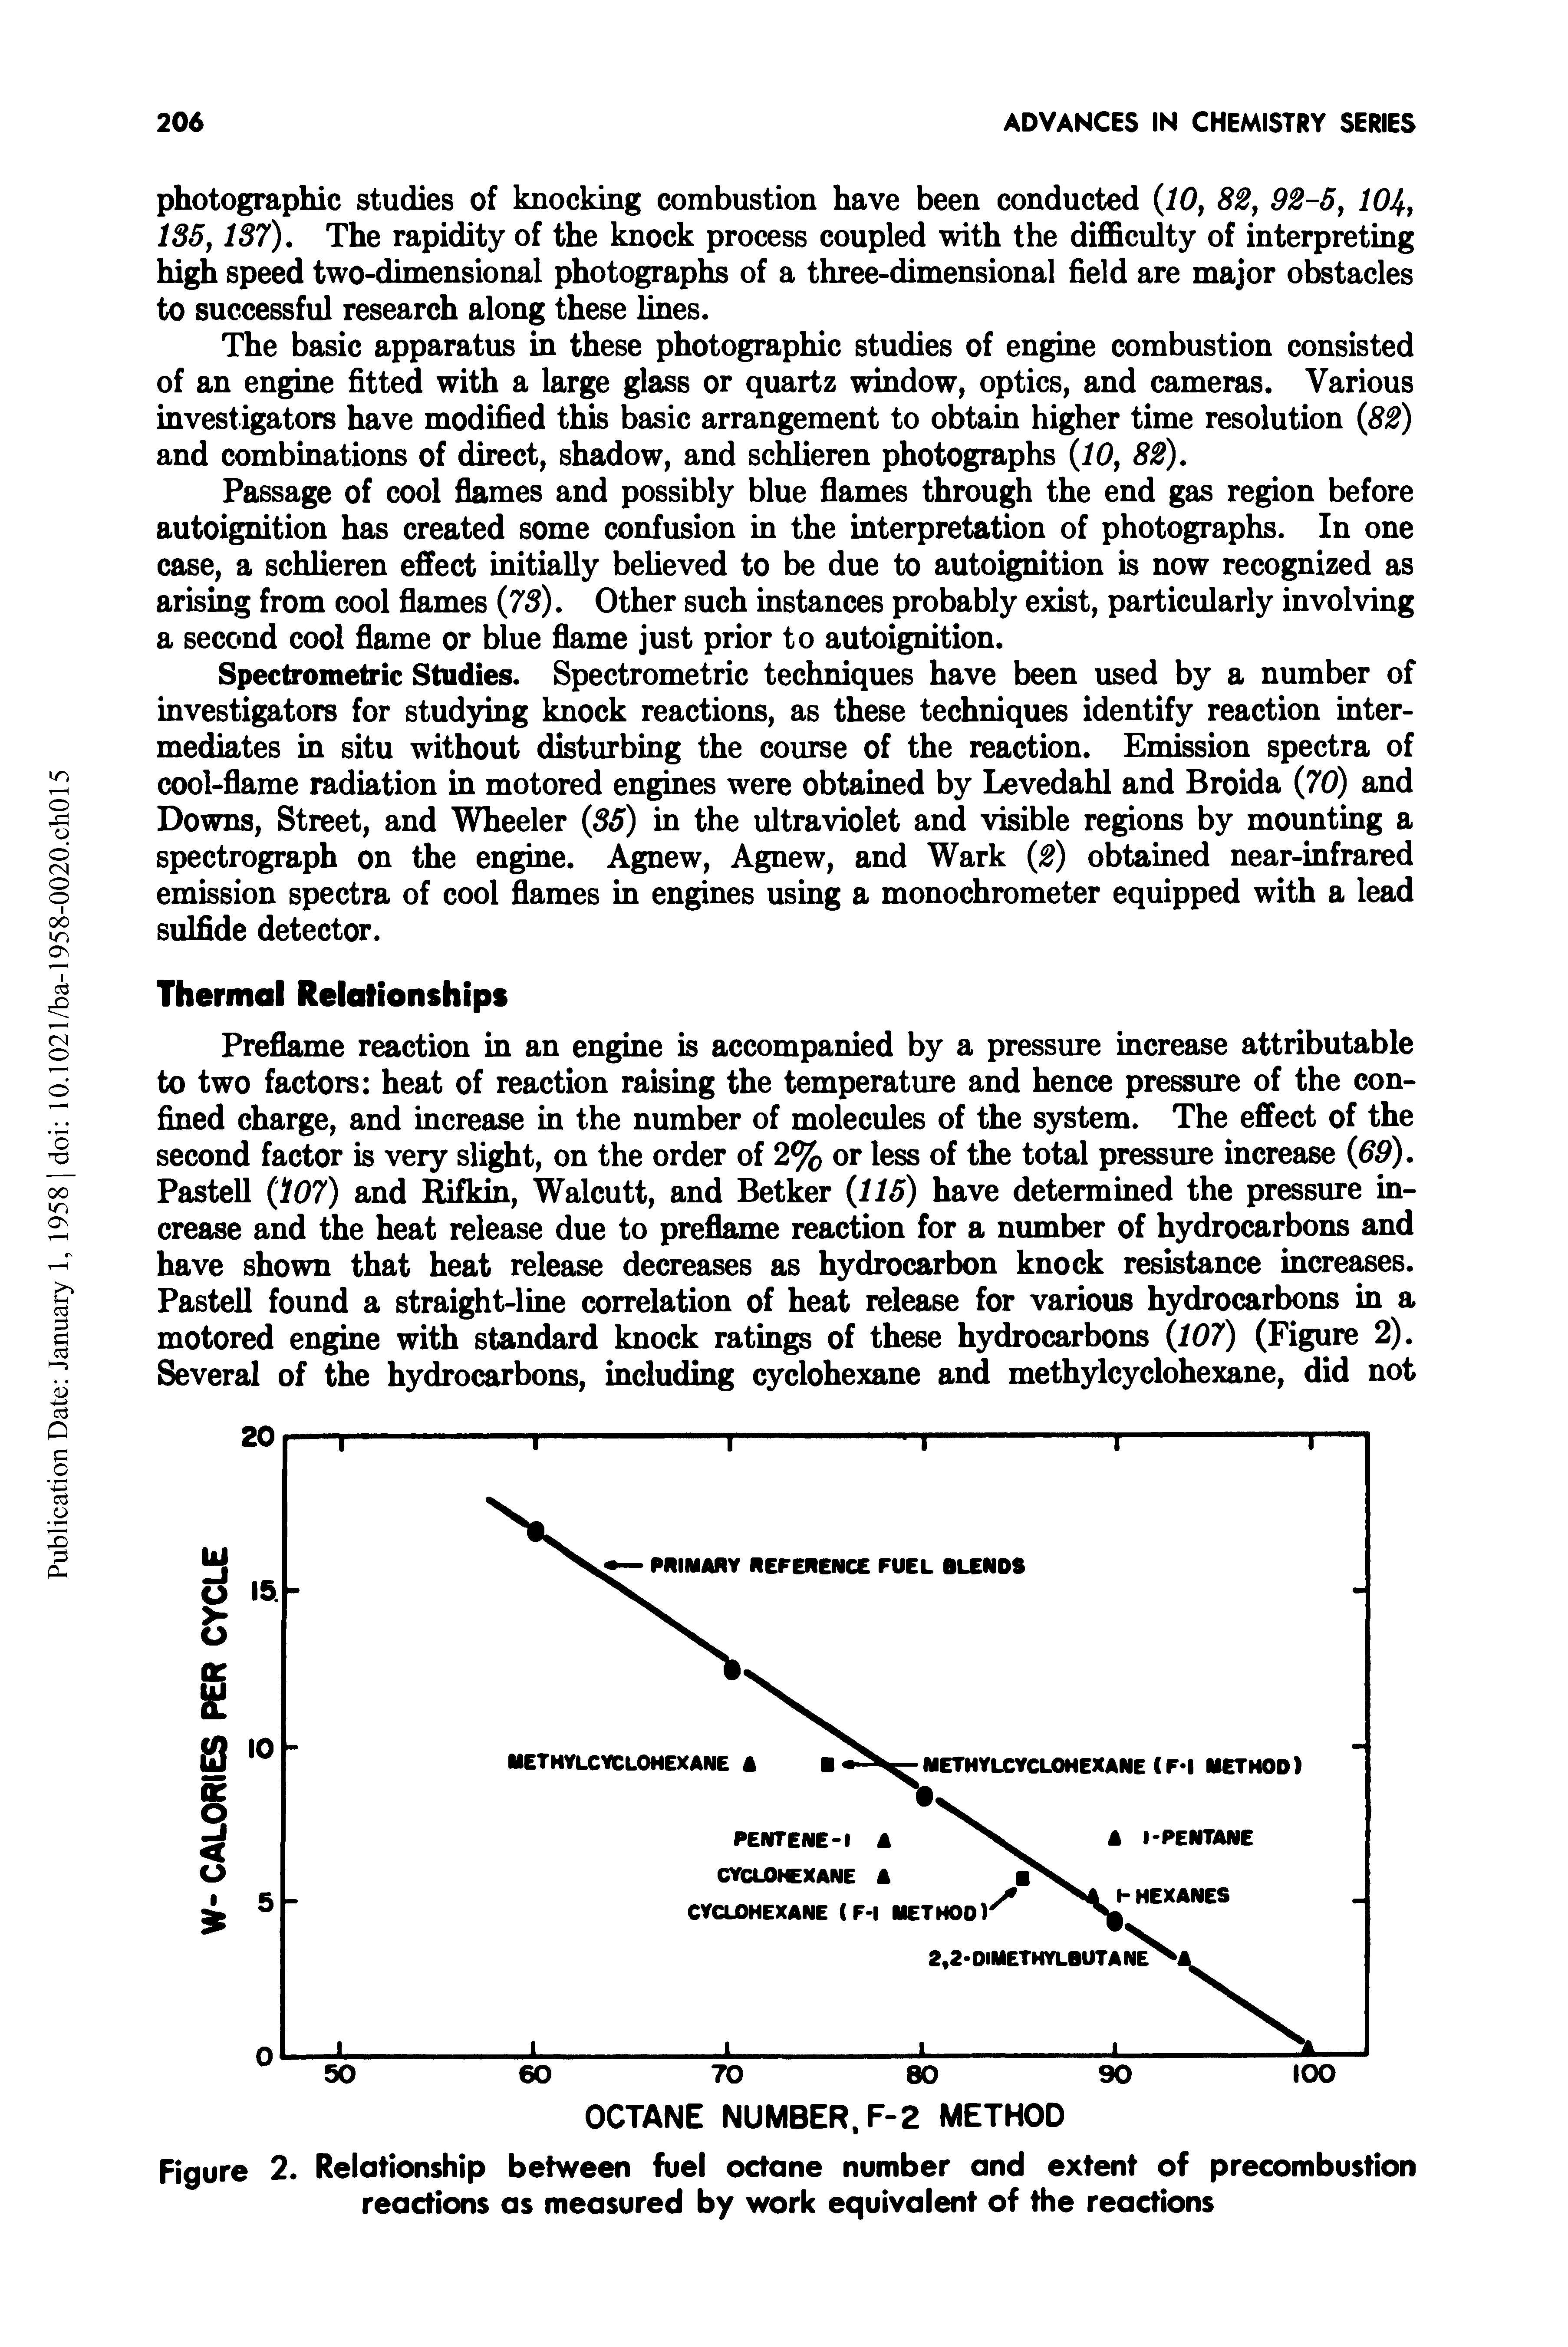 Figure 2. Relationship between fuel octane number and extent of precombustion reactions as measured by work equivalent of the reactions...